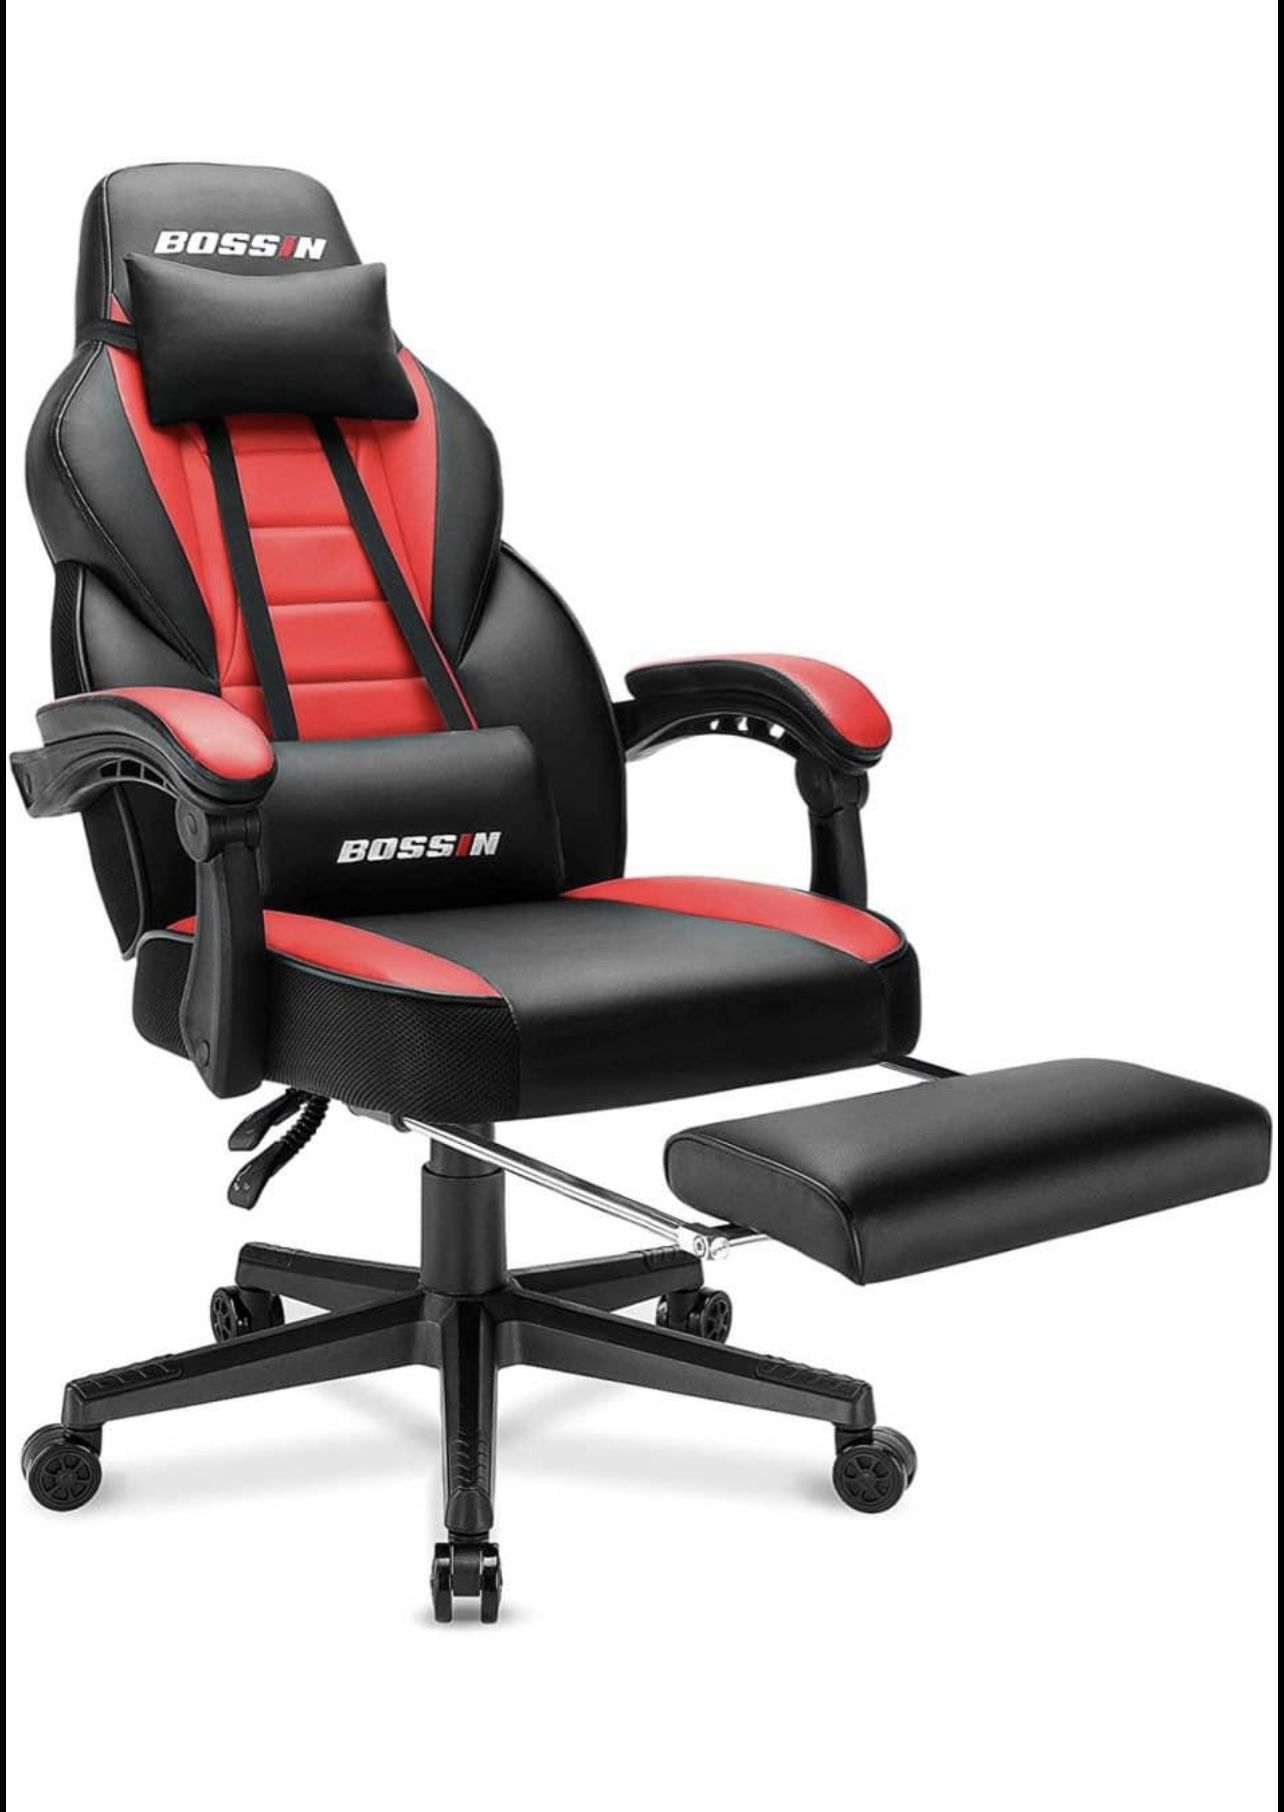 BOSSIN Gaming Chair, 400LBS Ergonomic Heavy Duty Design, Gamer Chair with Footrest and Lumbar Suppor